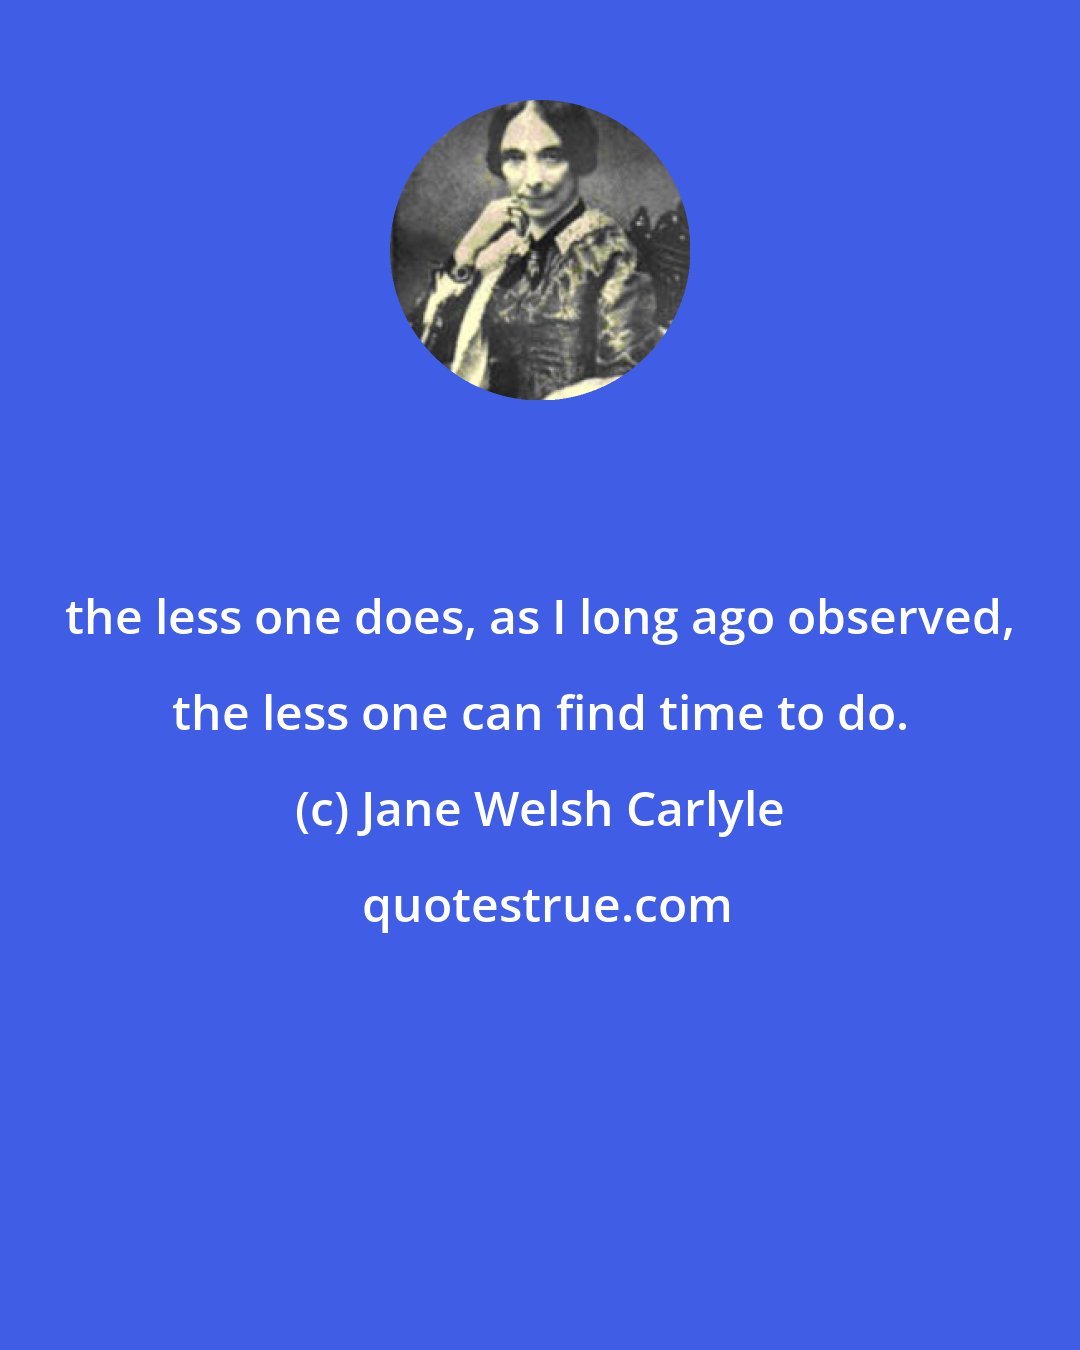 Jane Welsh Carlyle: the less one does, as I long ago observed, the less one can find time to do.